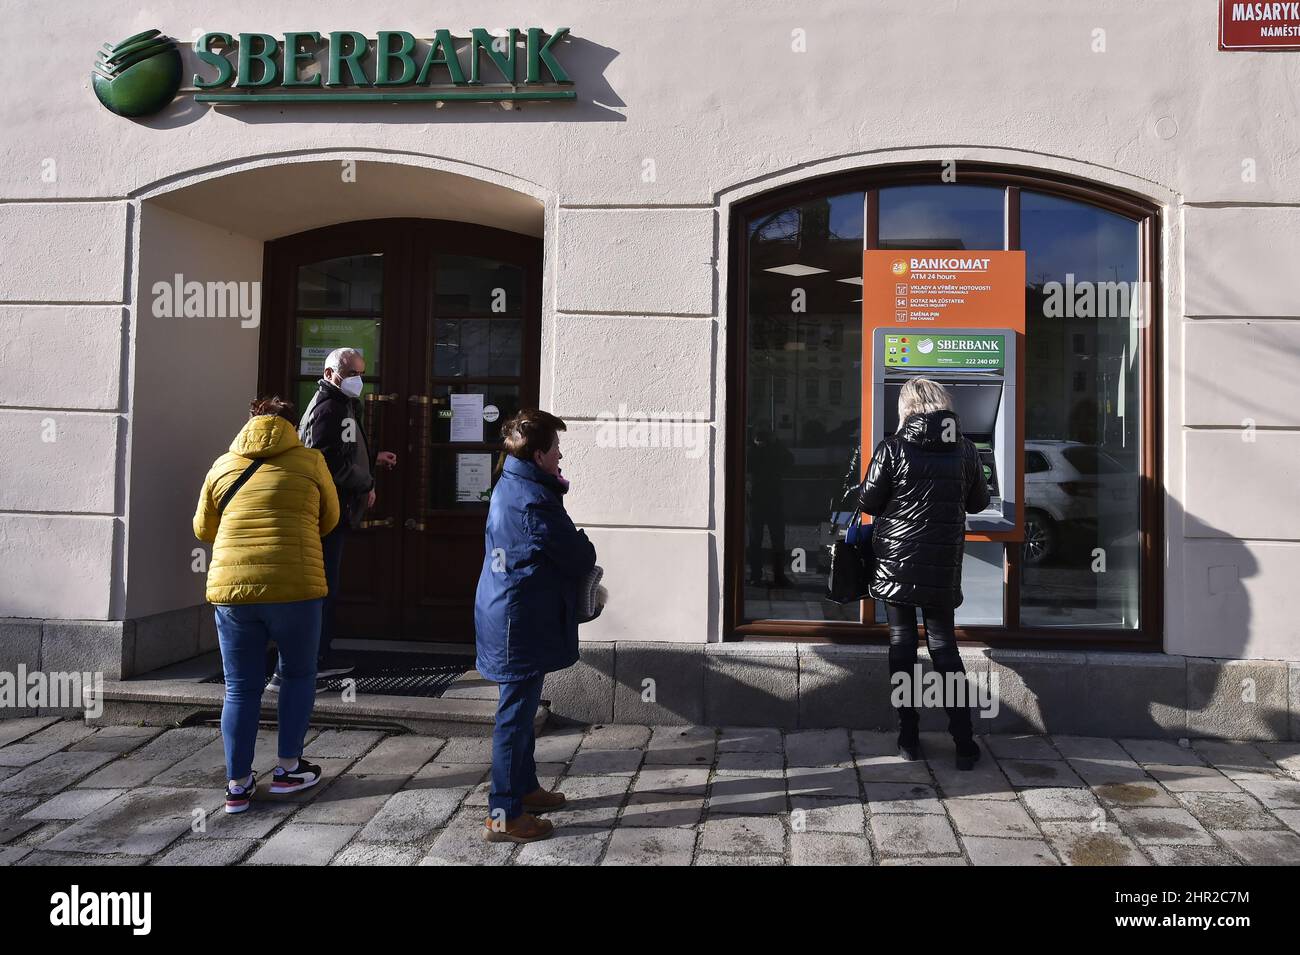 Jihlava, Czech Republic. 25th Feb, 2022. People are seen outside the branch of Russian bank Sberbank in Jihlava, Czech Republic, on February 25, 2022. In connection with the Russian army's attack on Ukraine, US President Joe Biden announced economic sanctions against Russian banks Sberbank and VTB. Credit: Lubos Pavlicek/CTK Photo/Alamy Live News Stock Photo